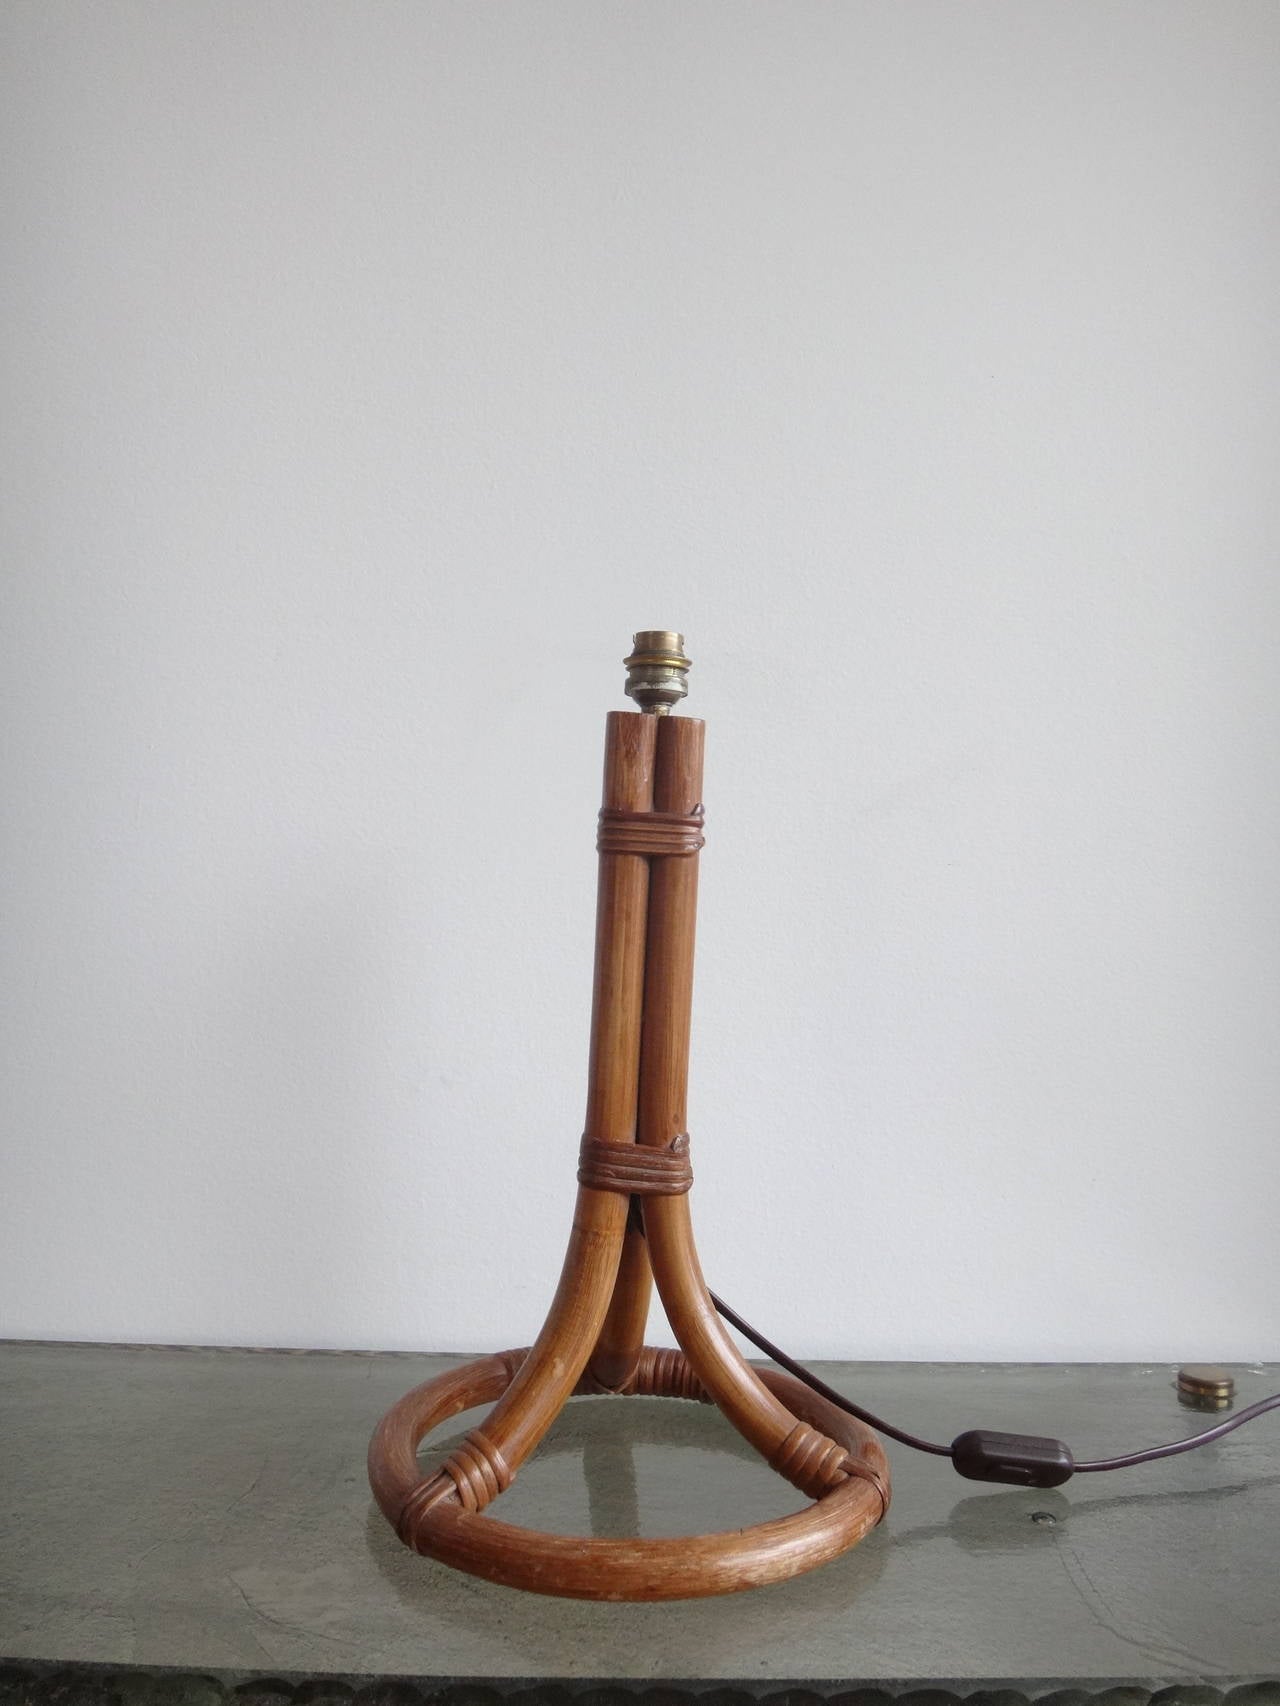 French Table lamp by Louis Sognot - France 1960's - Ipso Facto